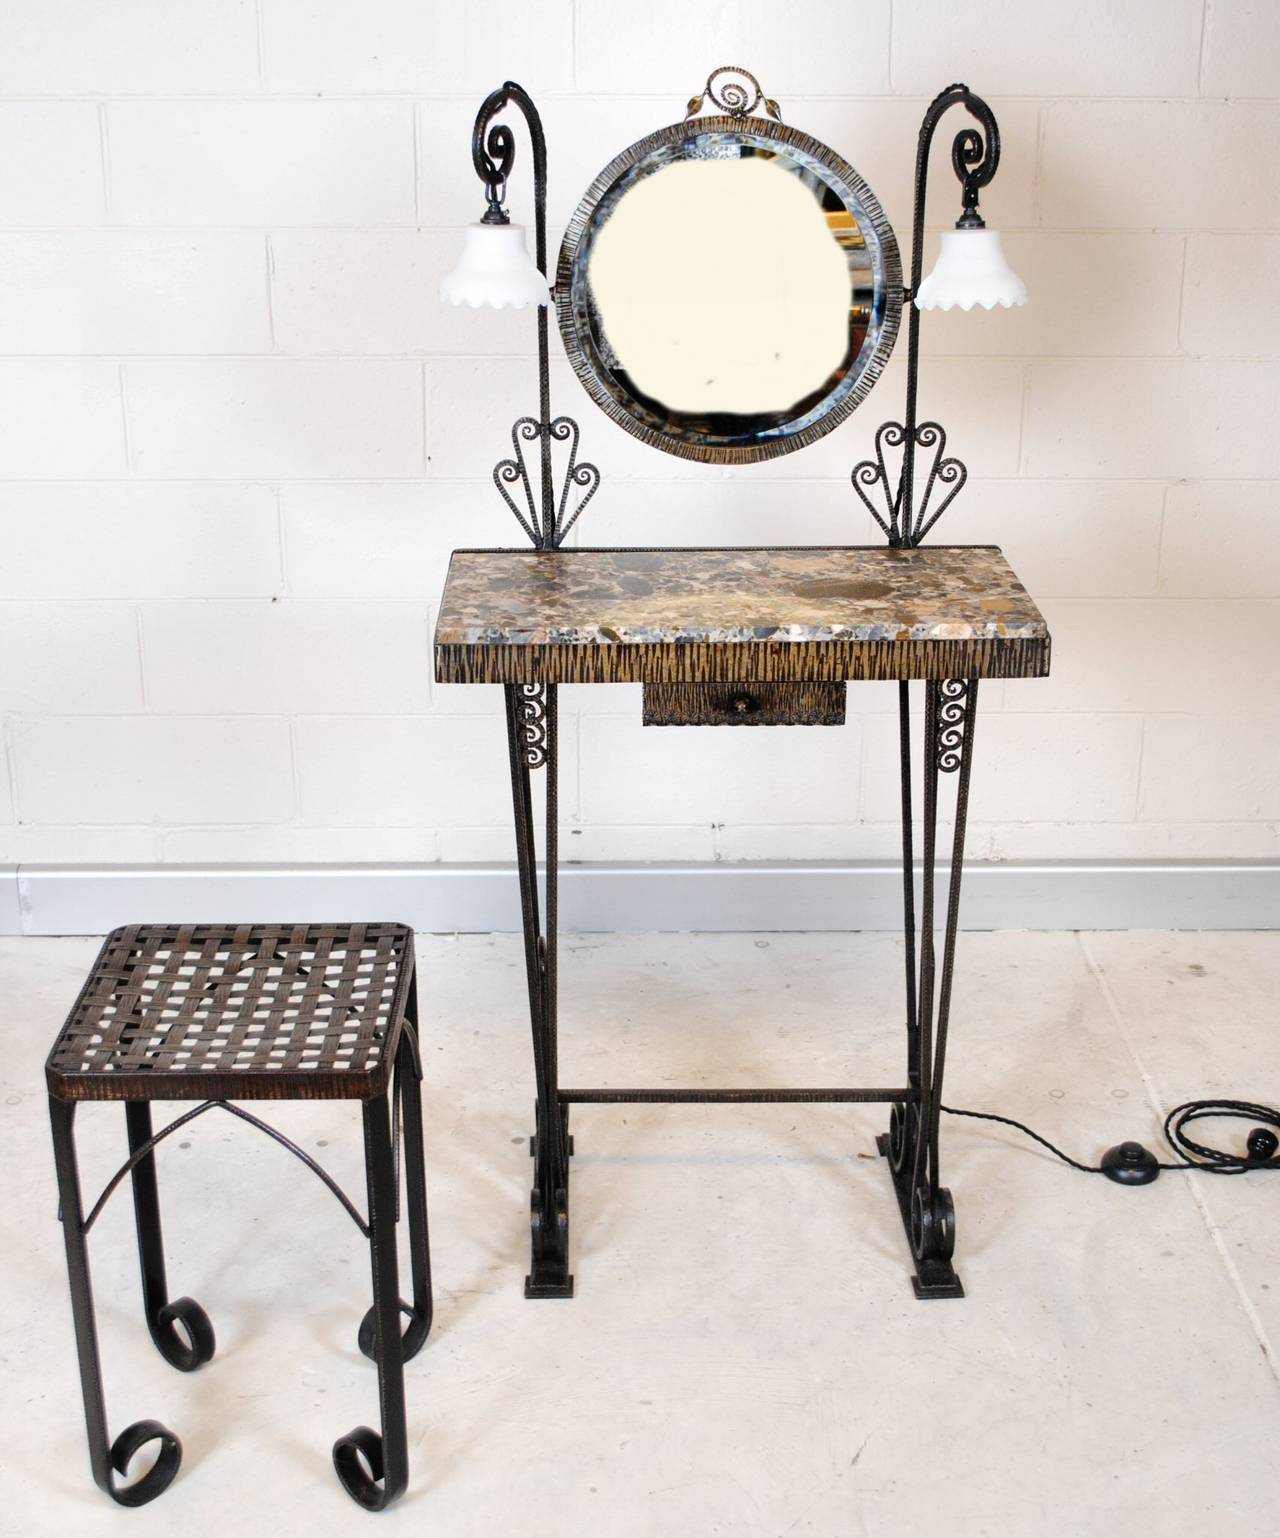 French Art Deco wrought iron vanity or dressing table. Featuring adjustable circular mirror with lights on either side, marble plate and small drawer. The seat has a wonderful basket weave to top. The set dates from the late 1920s and would be